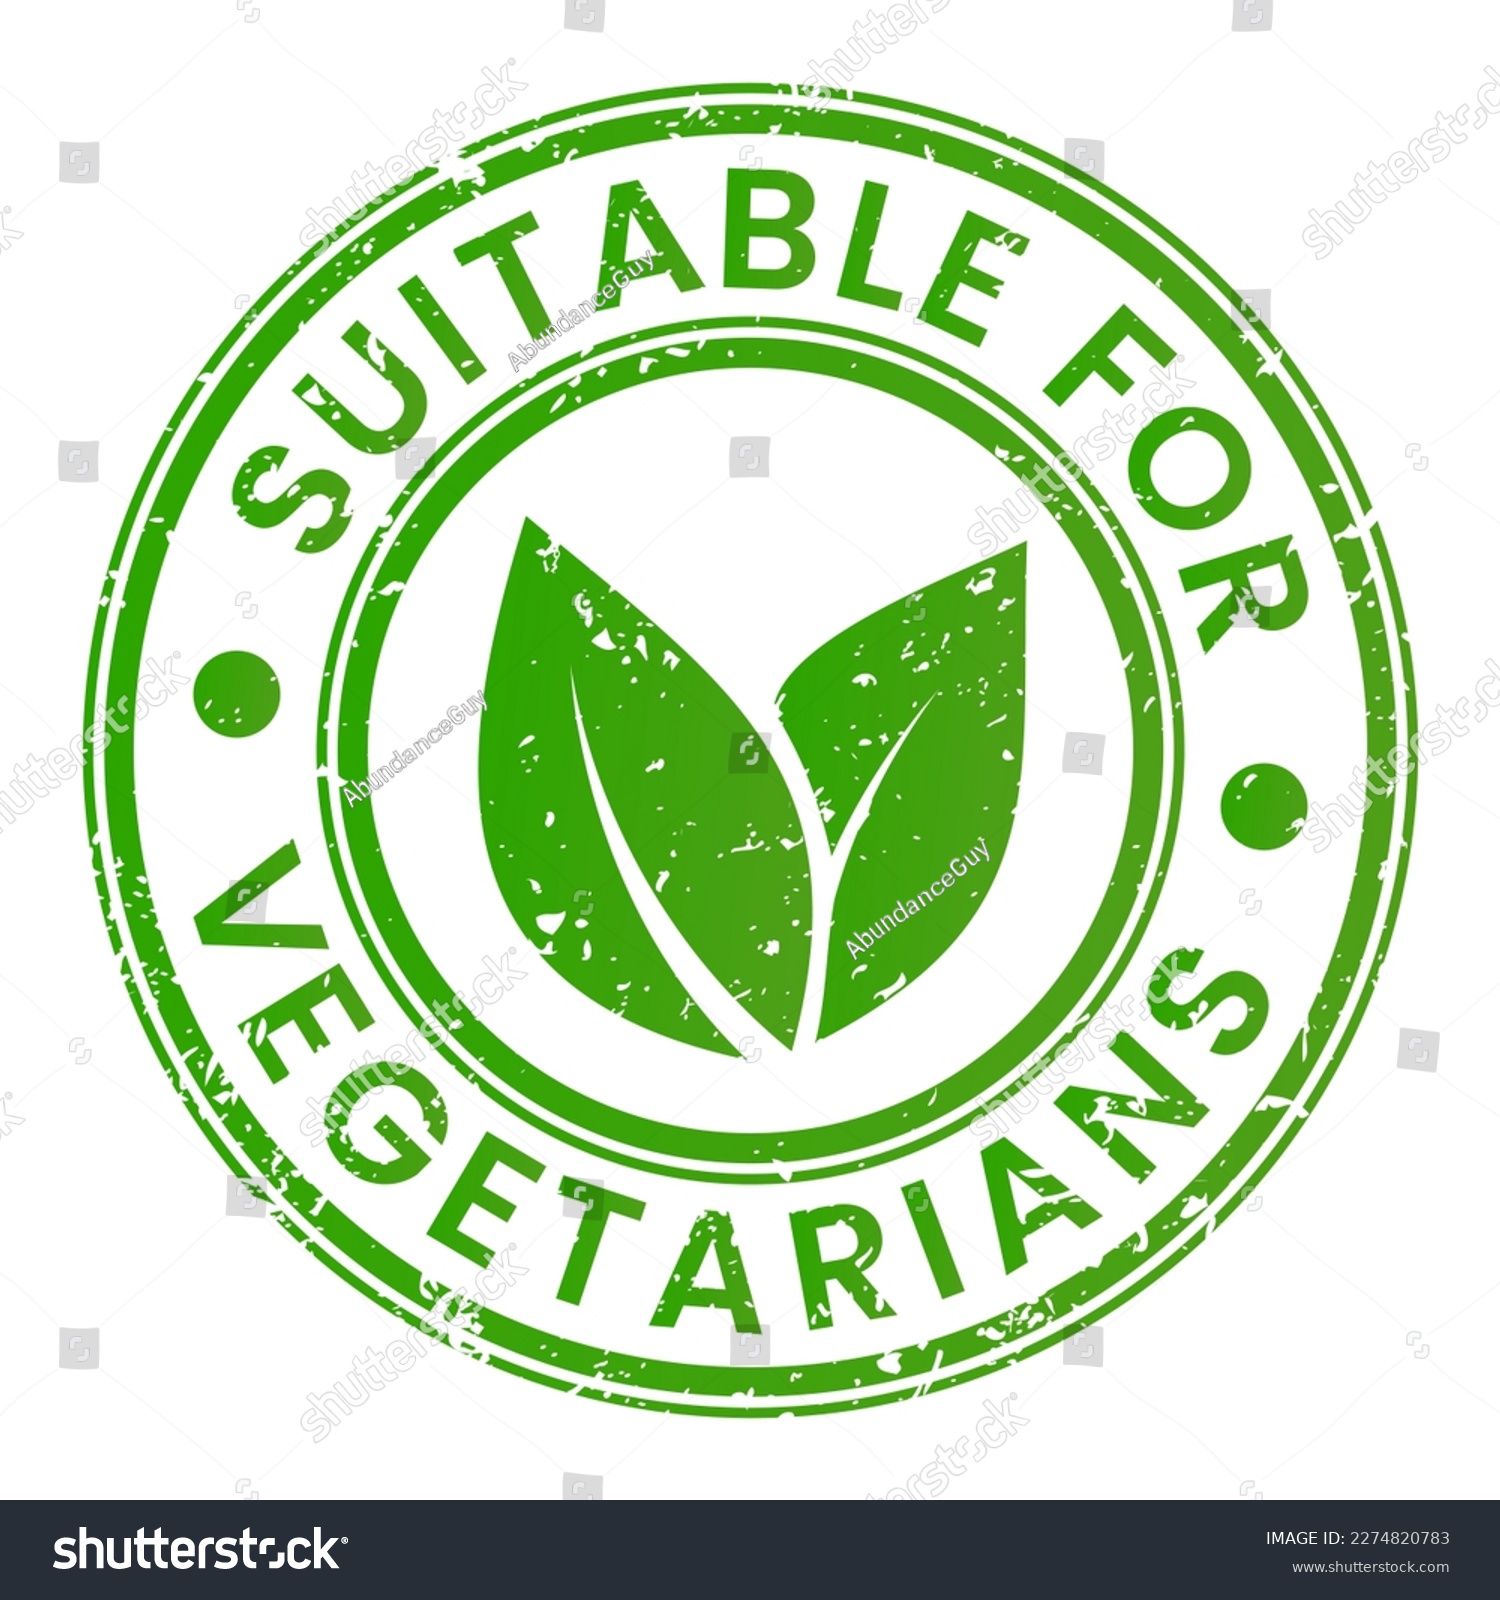 Grunge Green Suitable for Vegetarians stamp sticker with Leaves icon vector illustration #2274820783